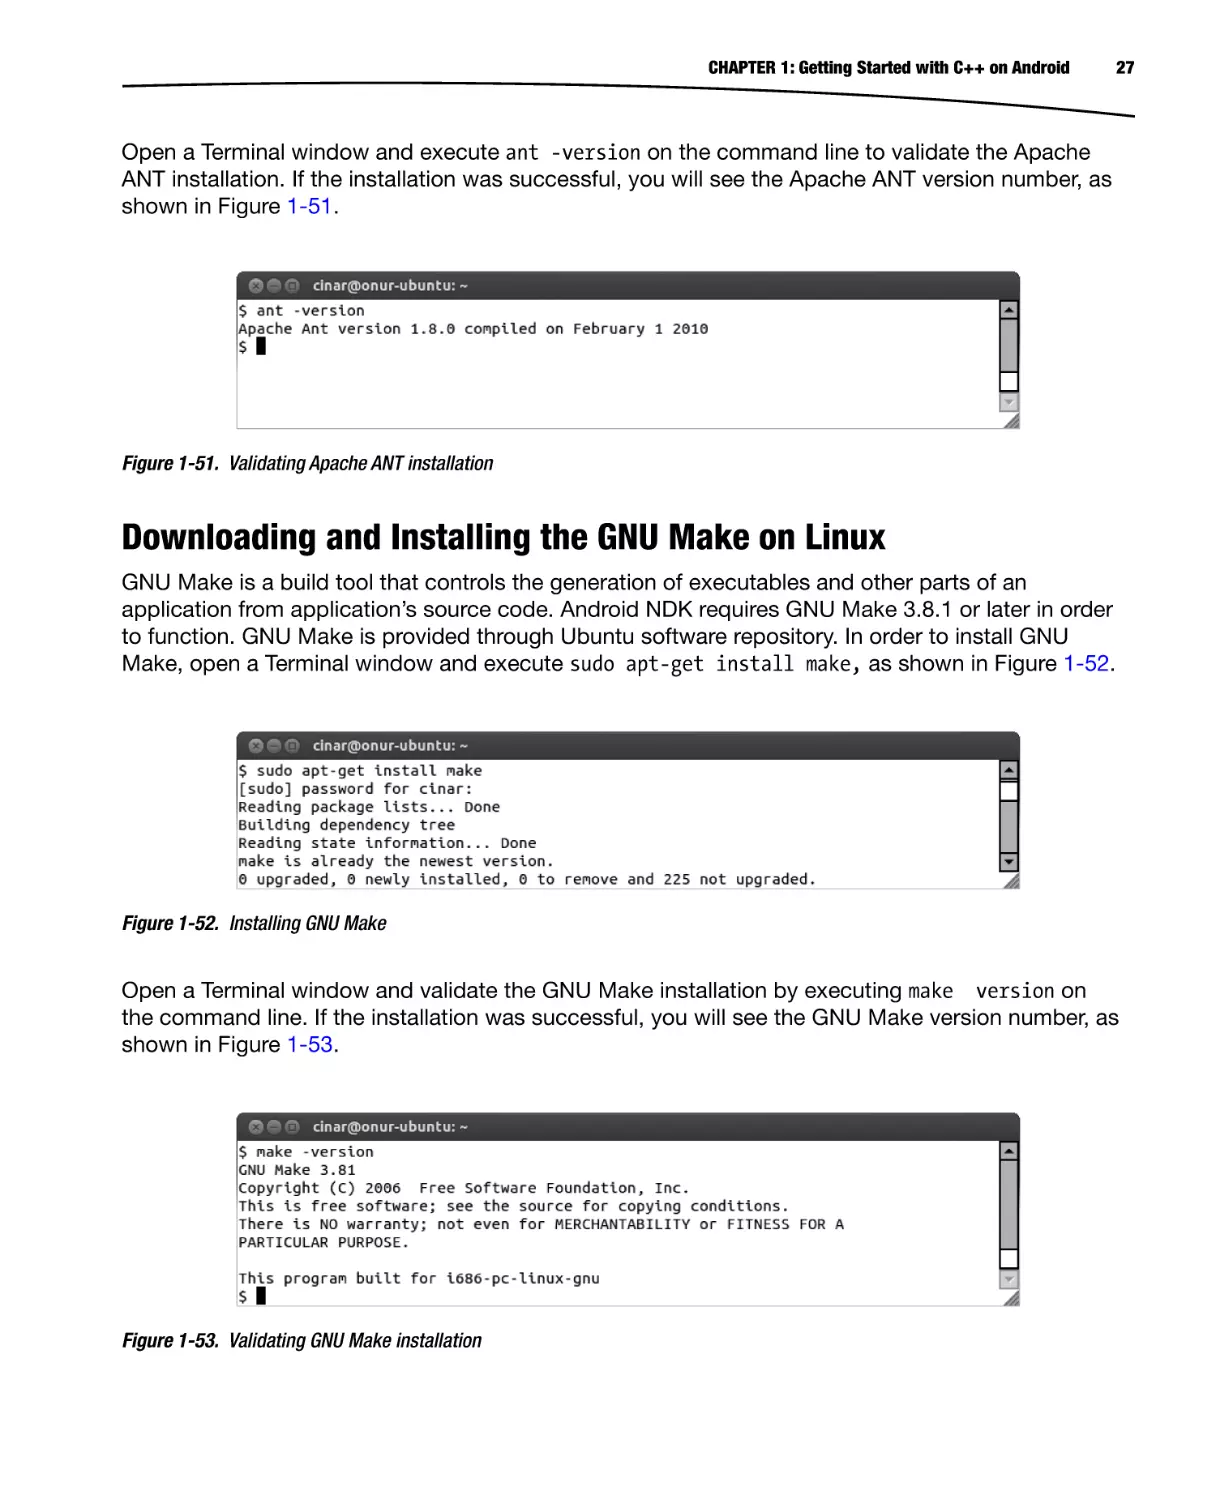 Downloading and Installing the GNU Make on Linux